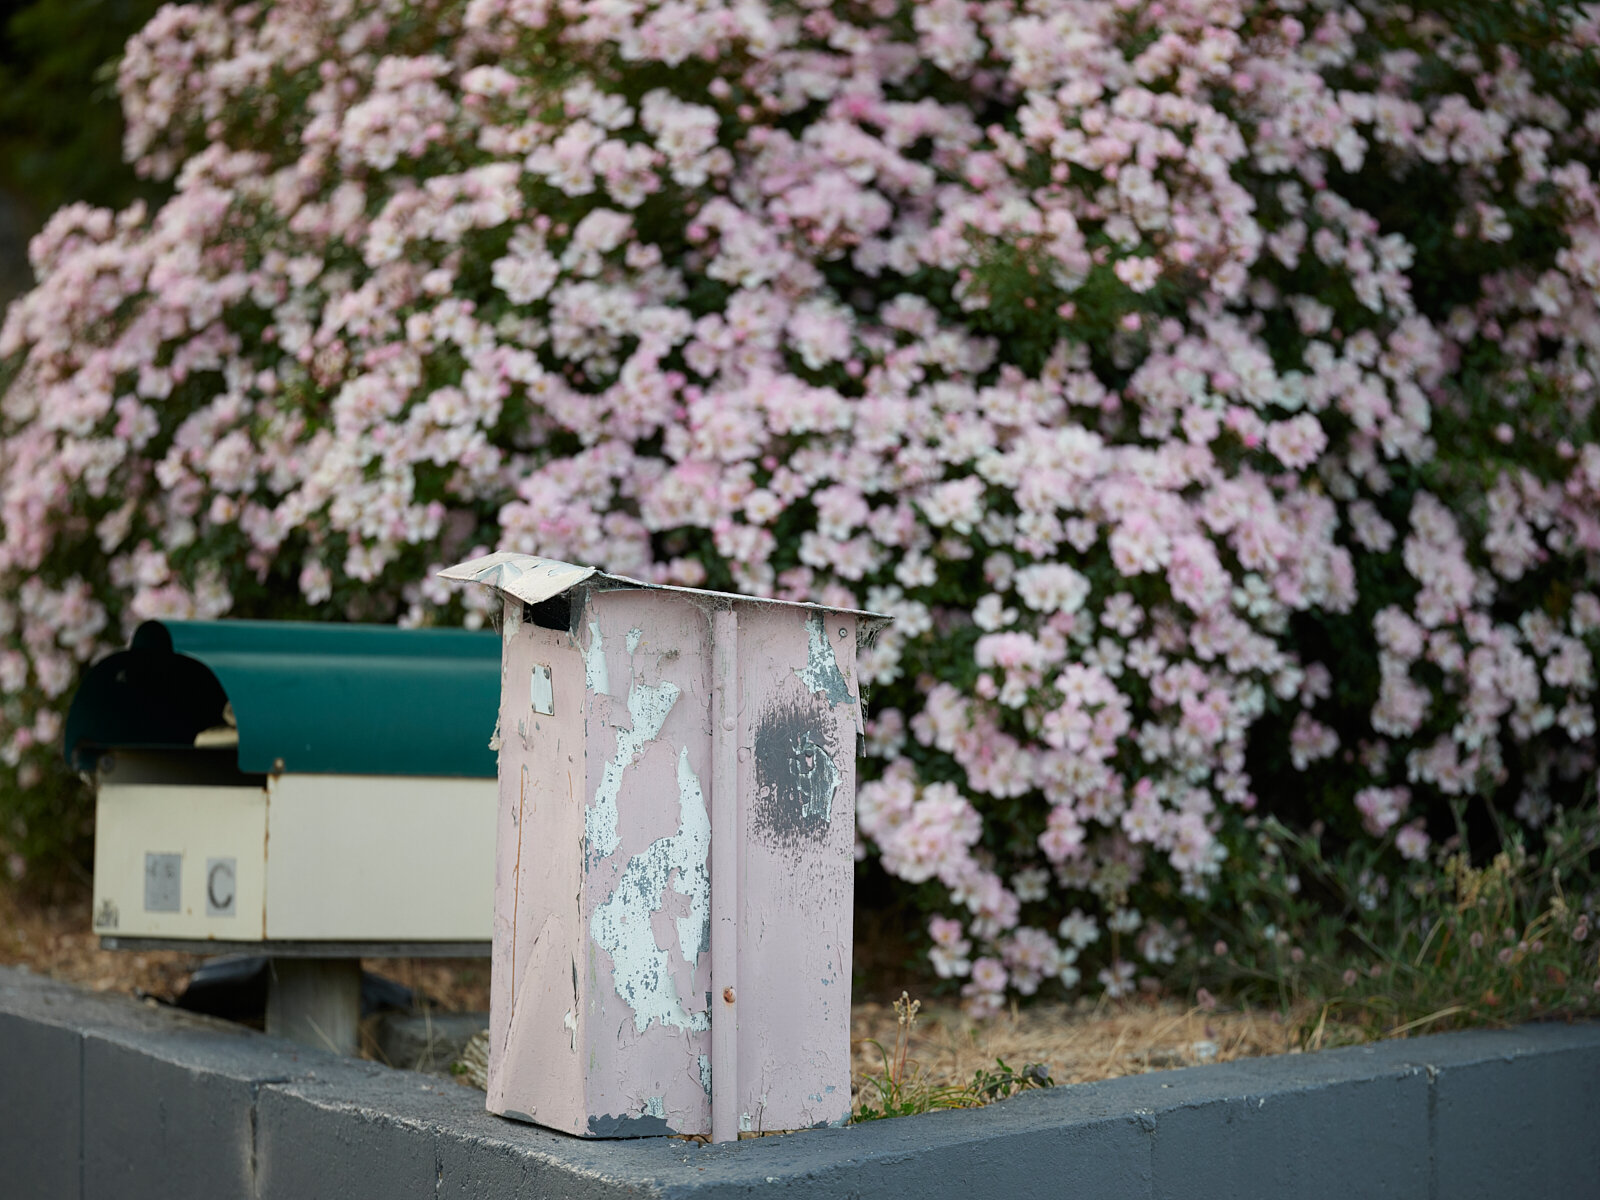   Carpet Rose and Pink Letter Box, Alexandra, Central Otago. 2020. 330 x 250mm  